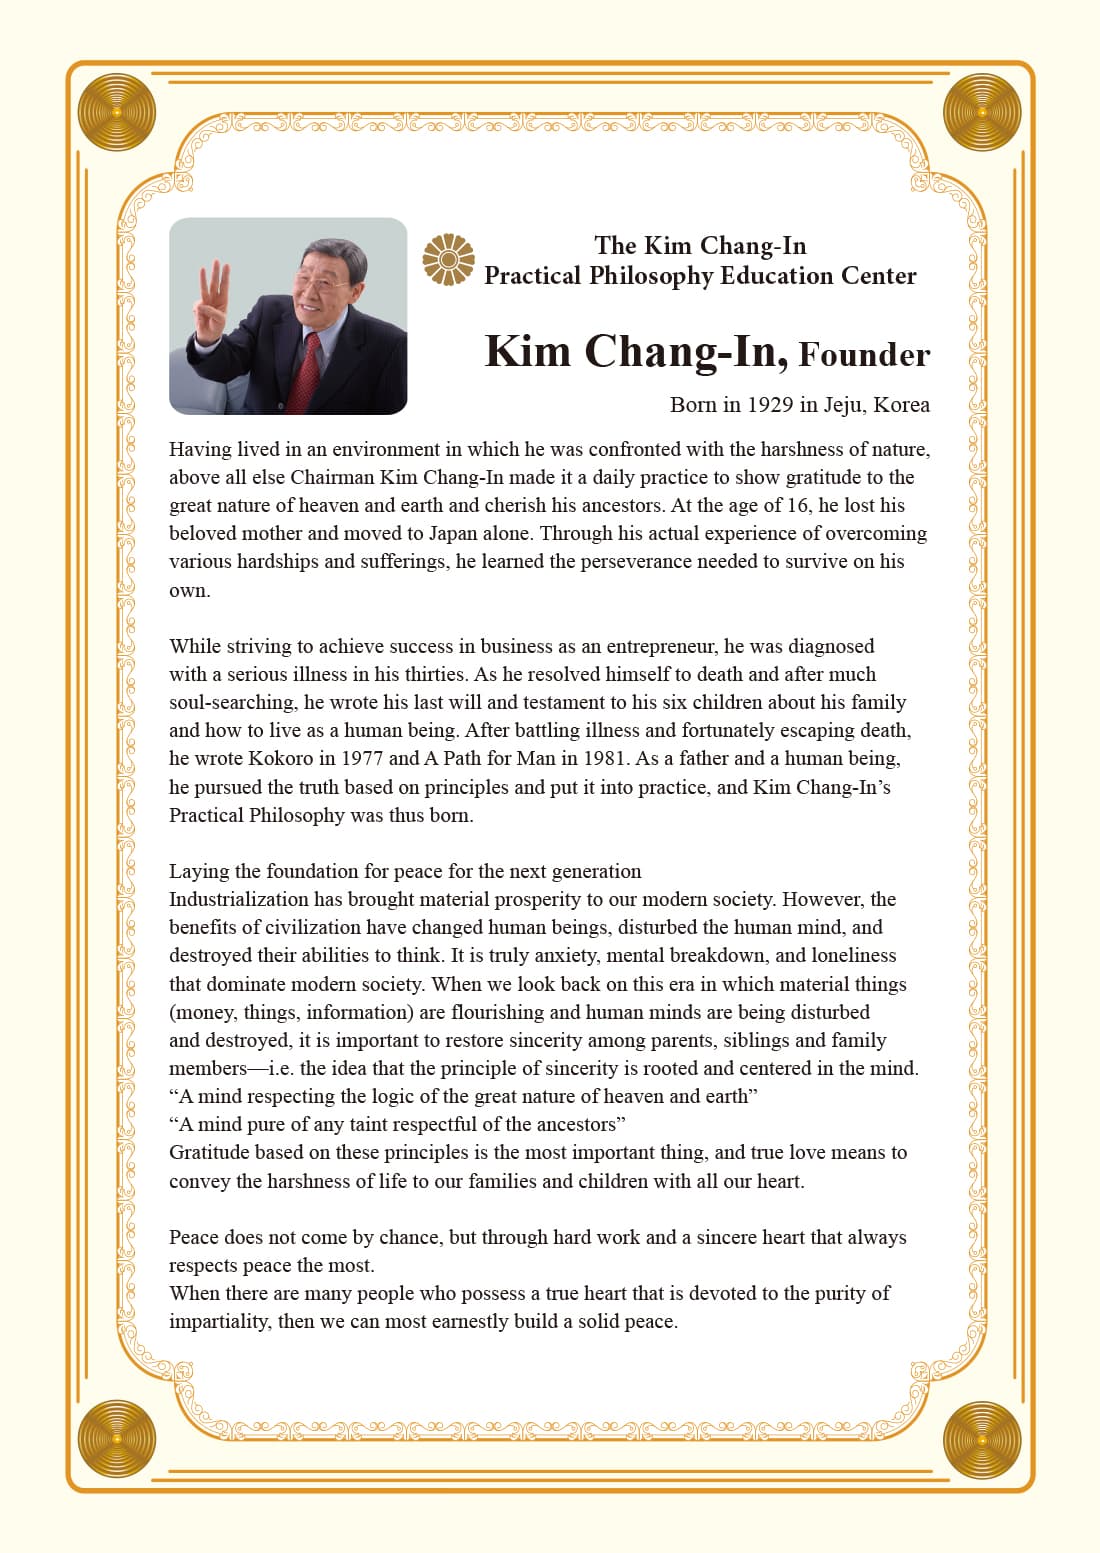 Kim Chang-In, Founder